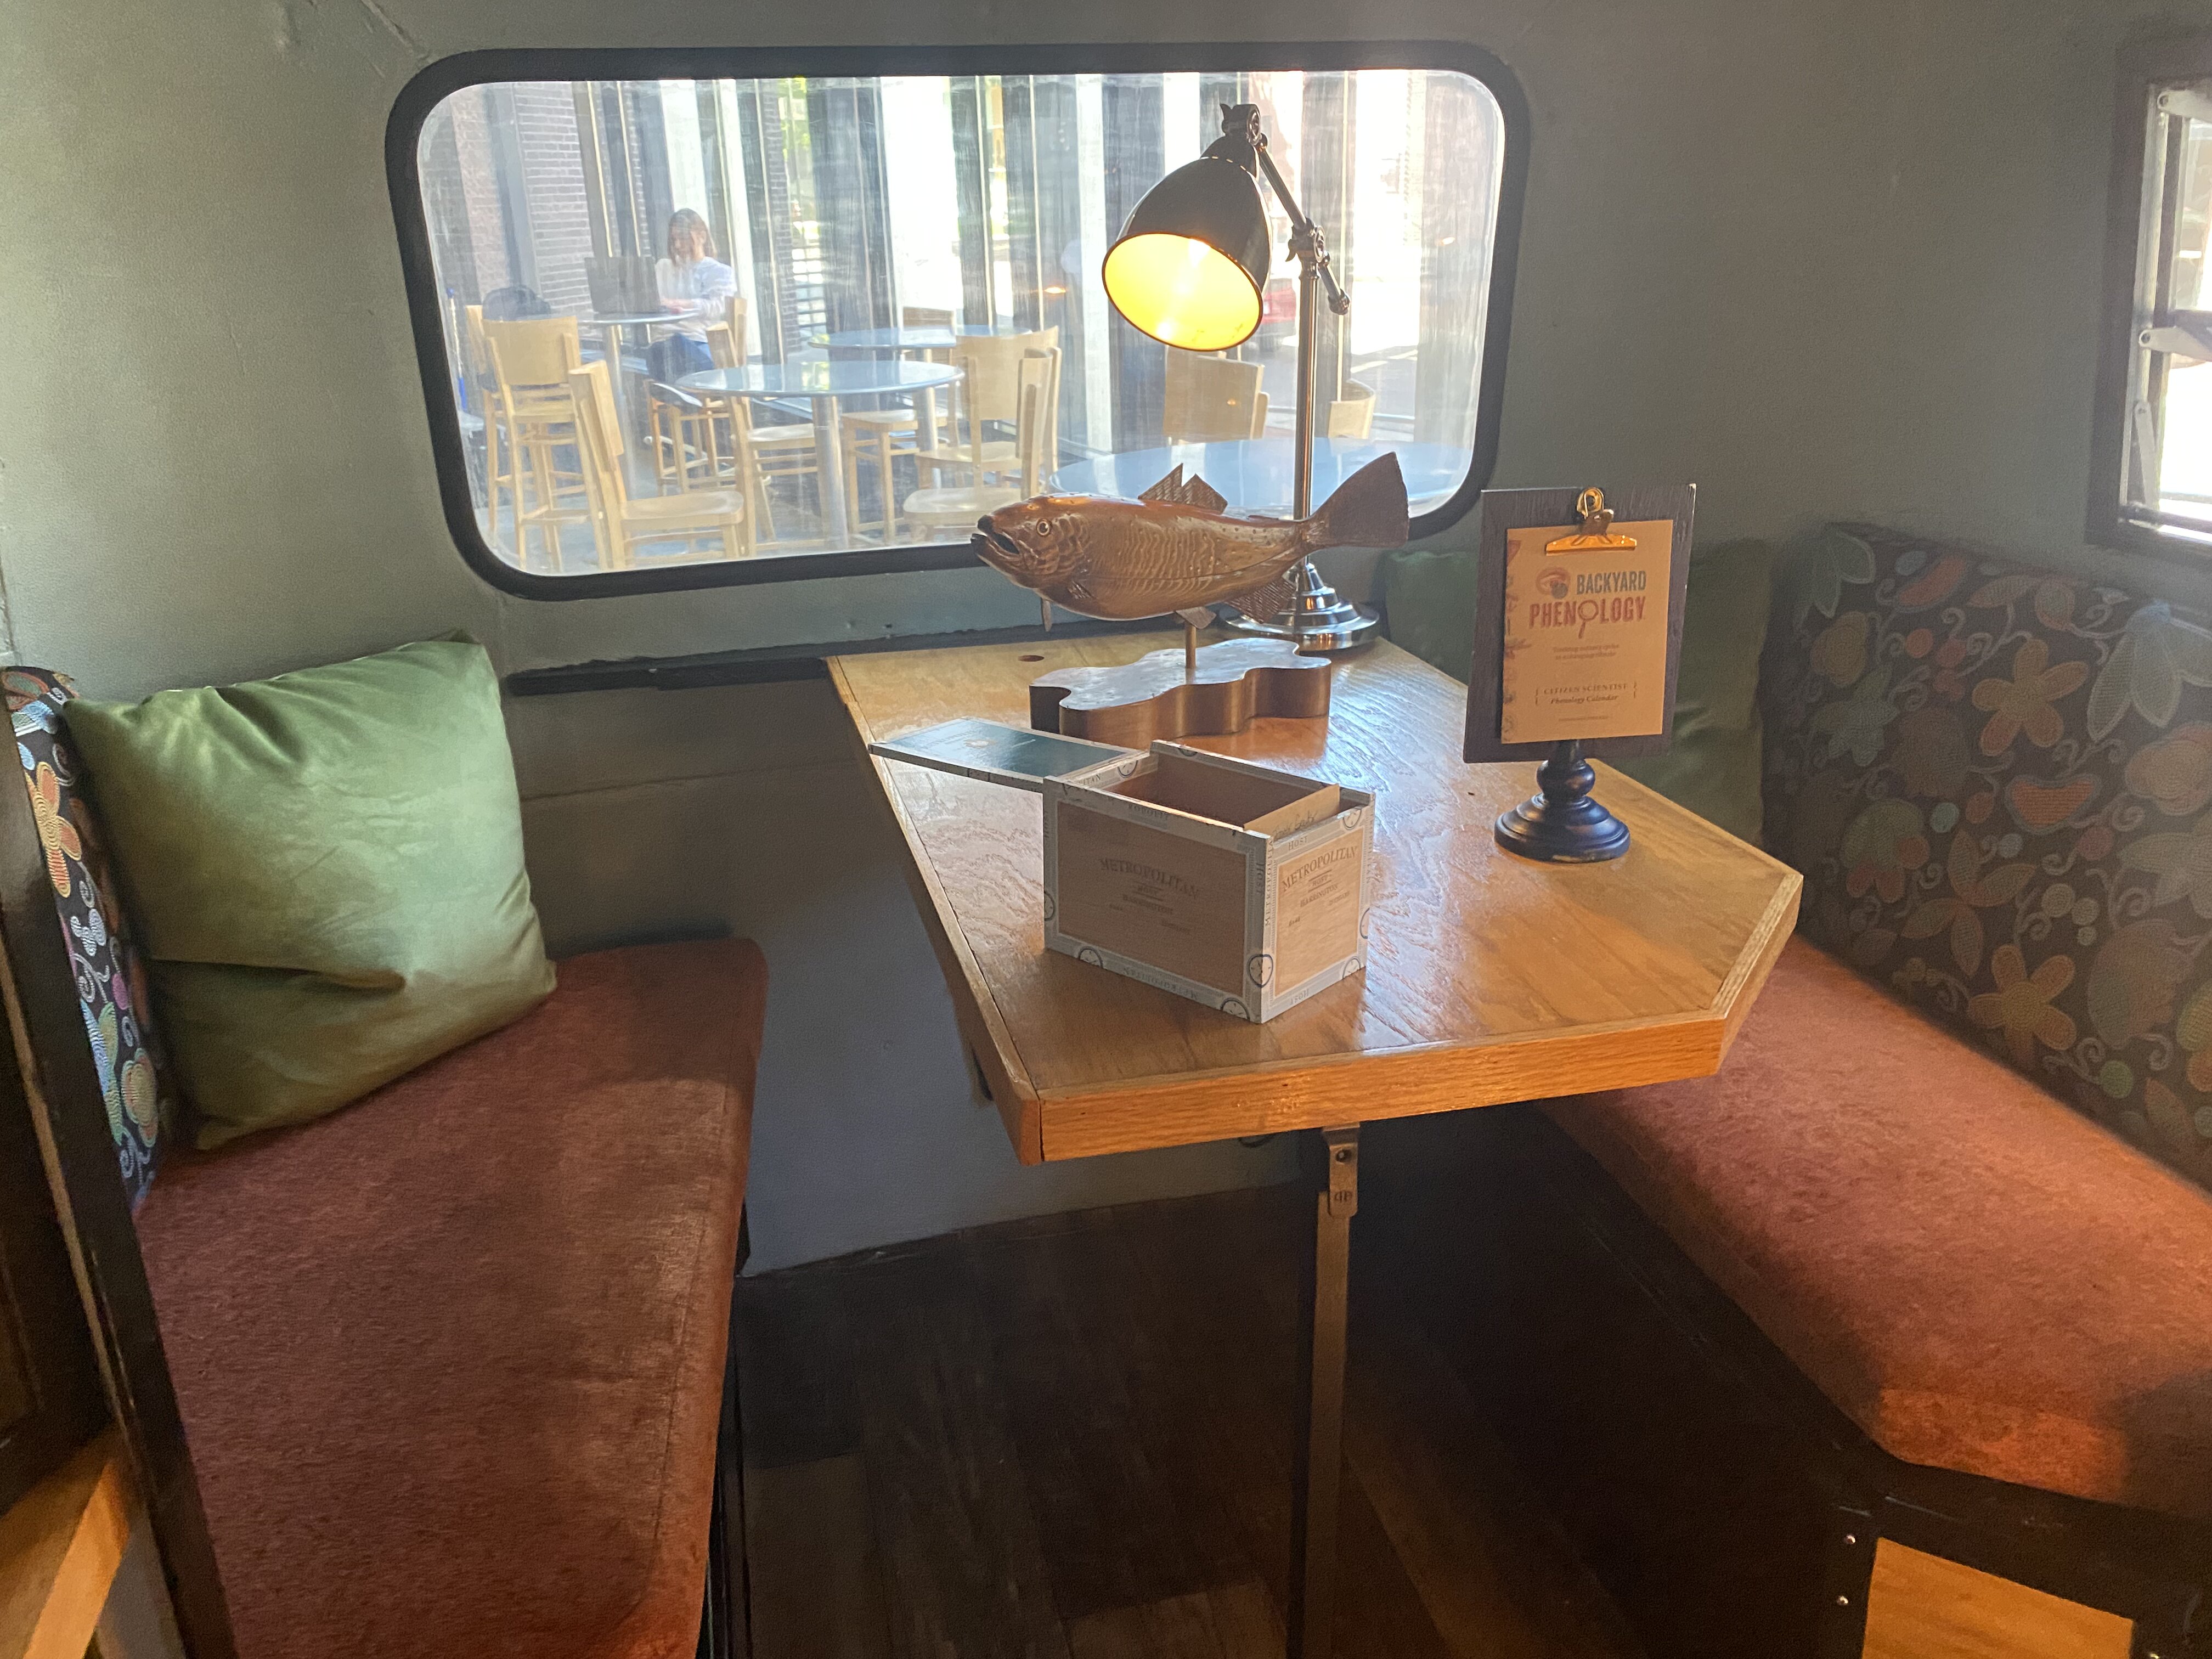 Camper interiorwith cushioned seating around a table and objects to interact with